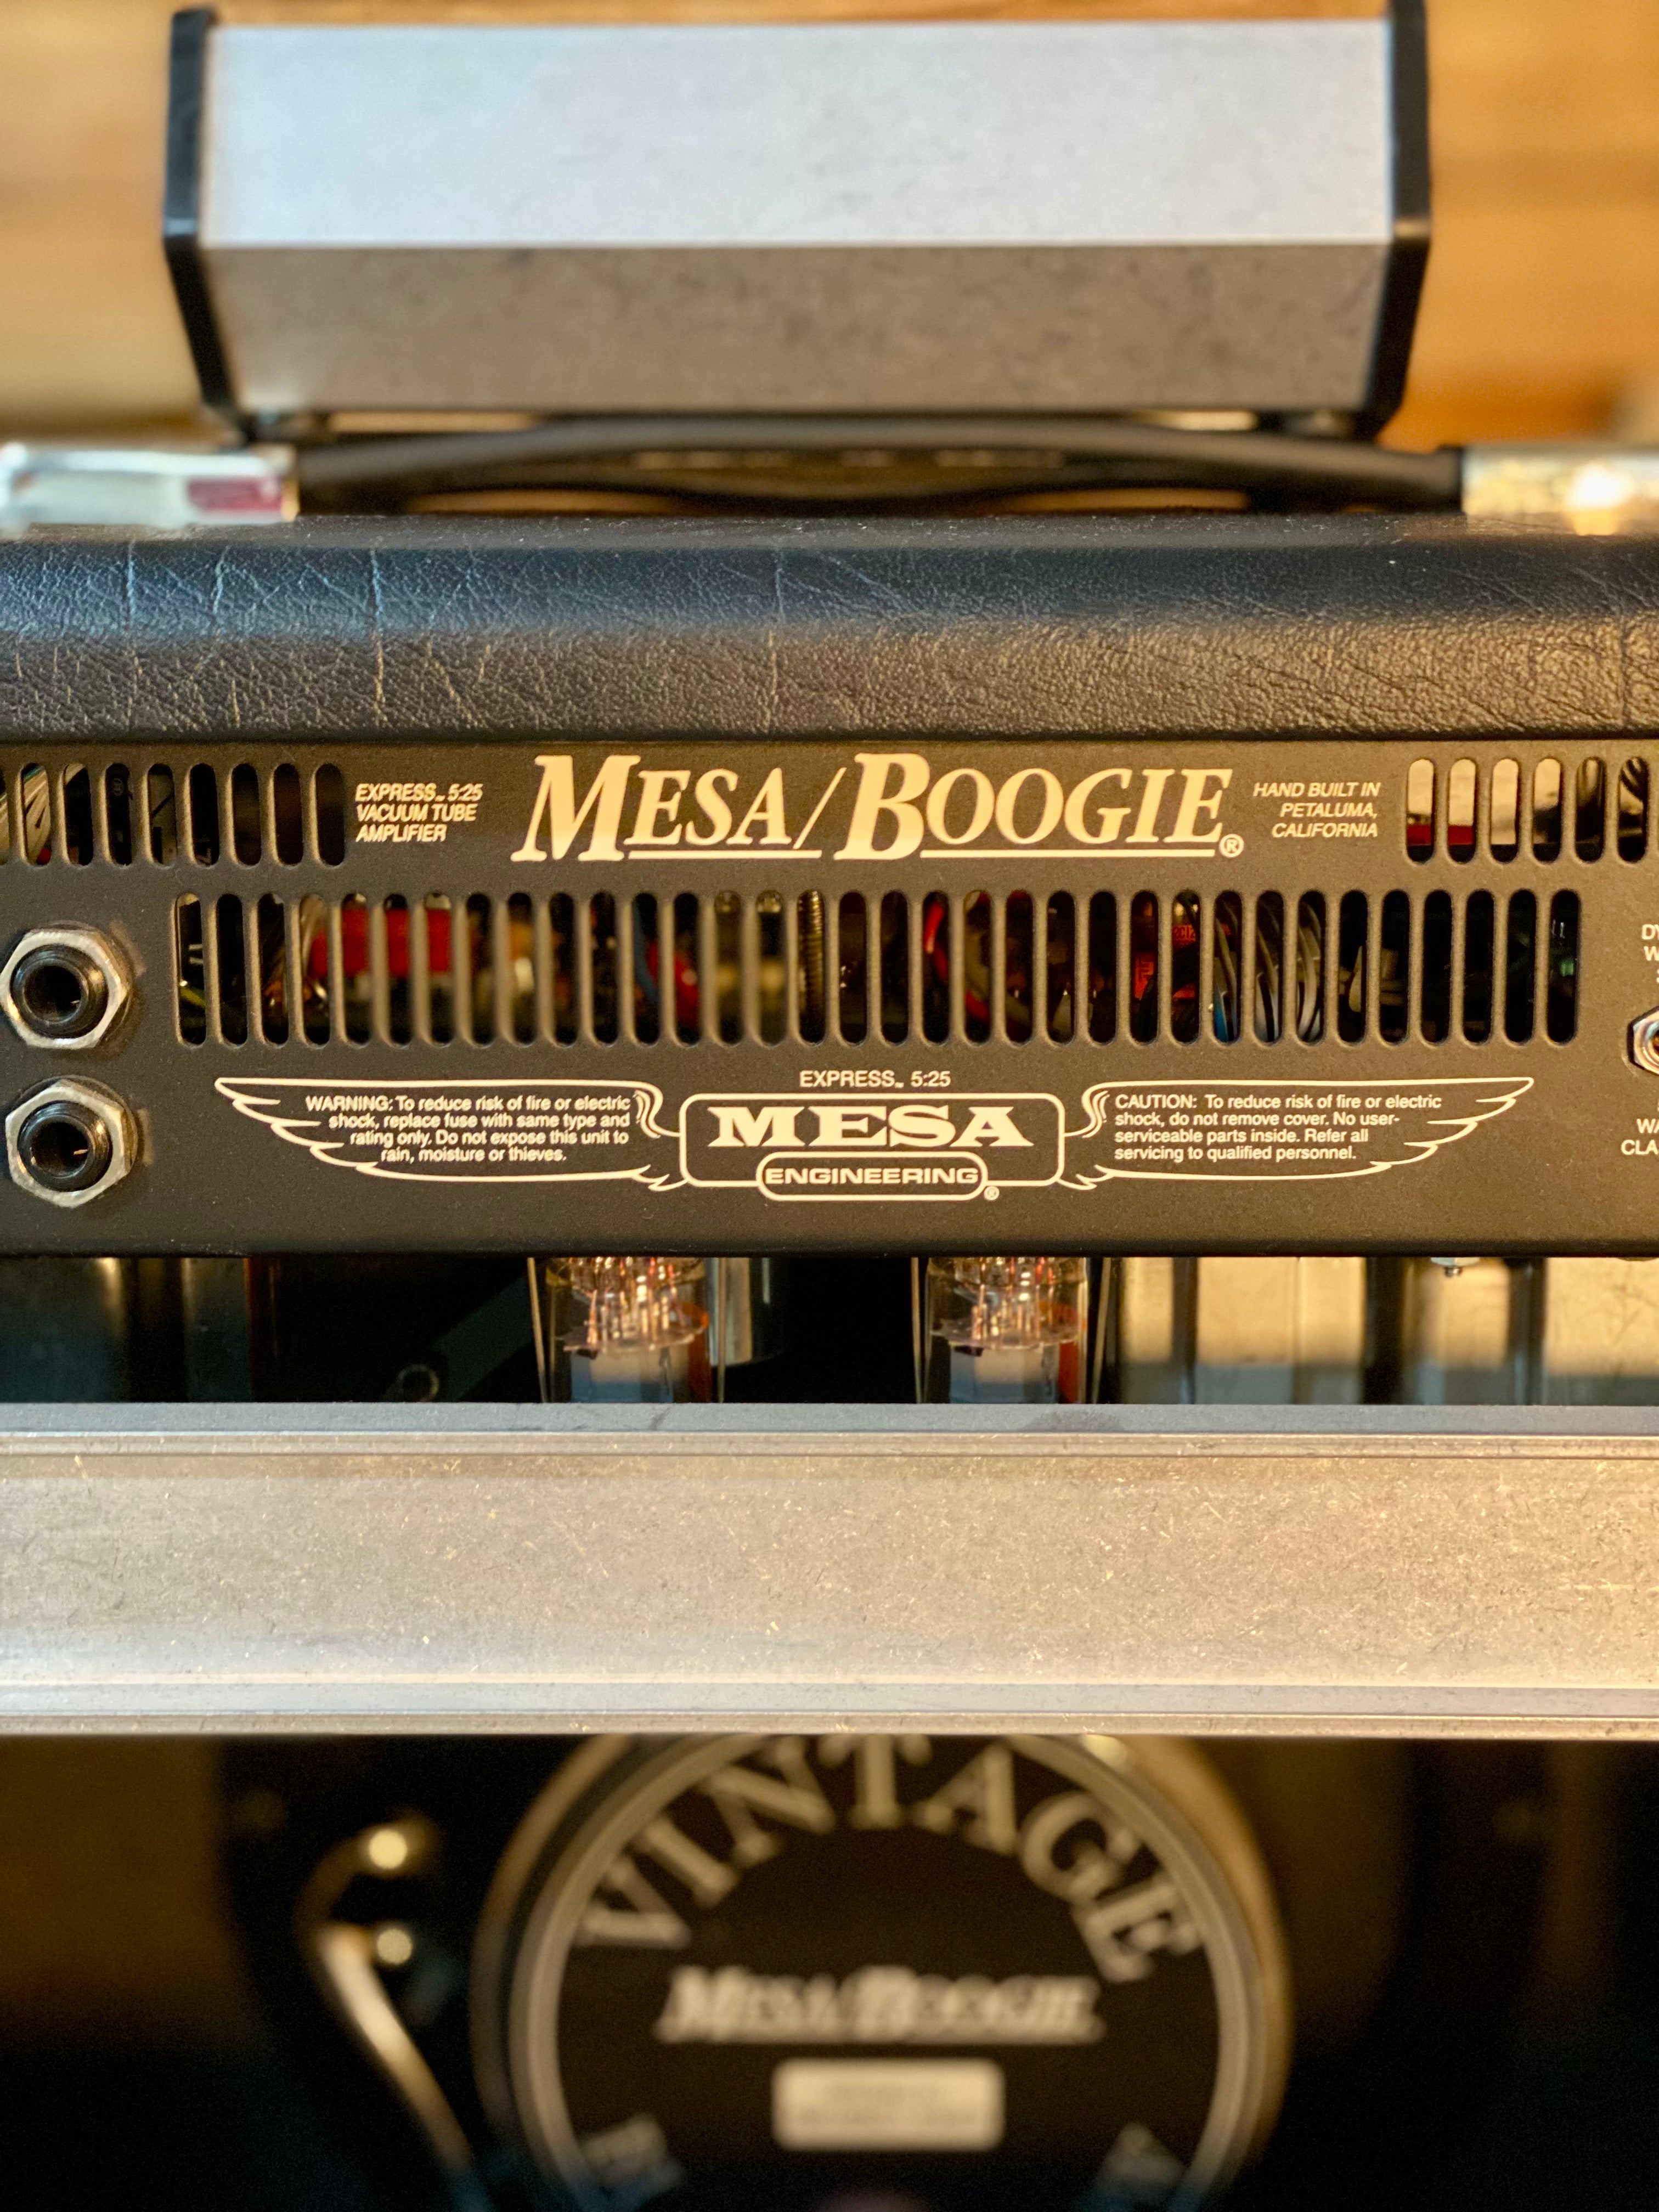 Mesa 5:25 Express Combo Amp with Footswitch and Cover. USED